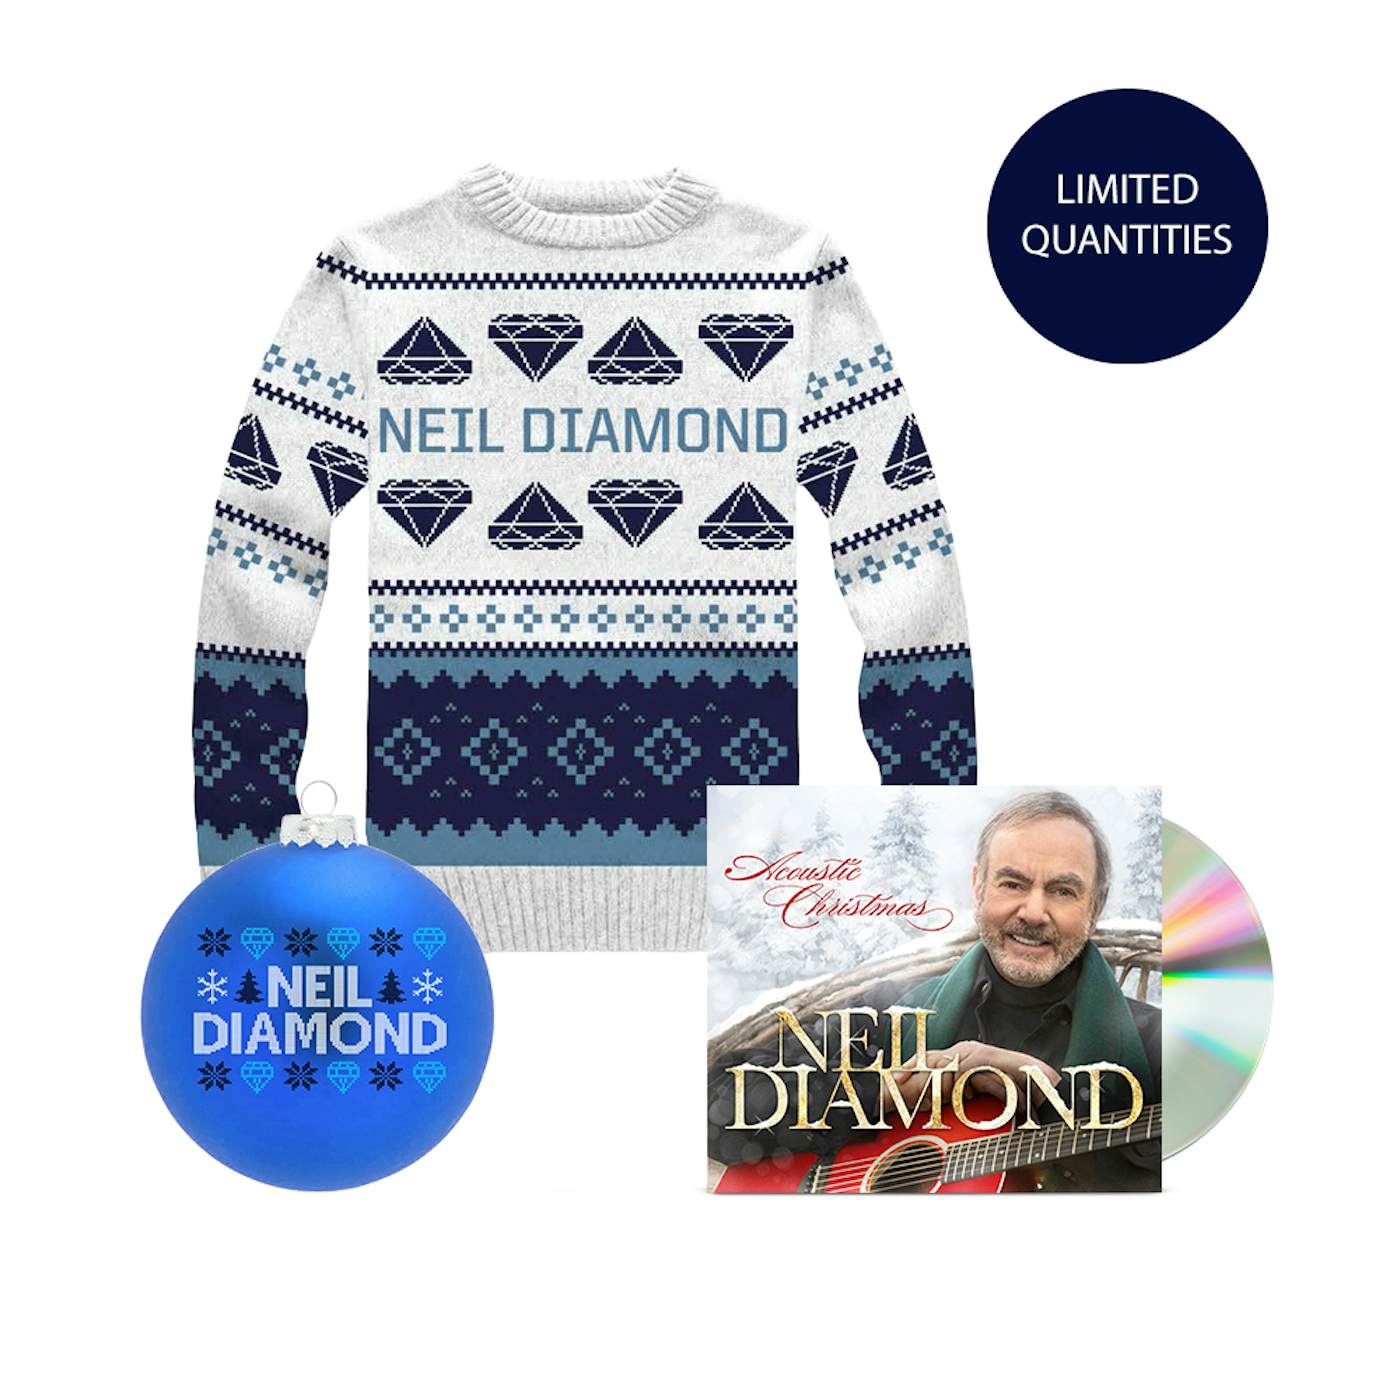 Neil Diamond Acoustic Christmas CD + Holiday Knit Sweater + Holiday Ornament